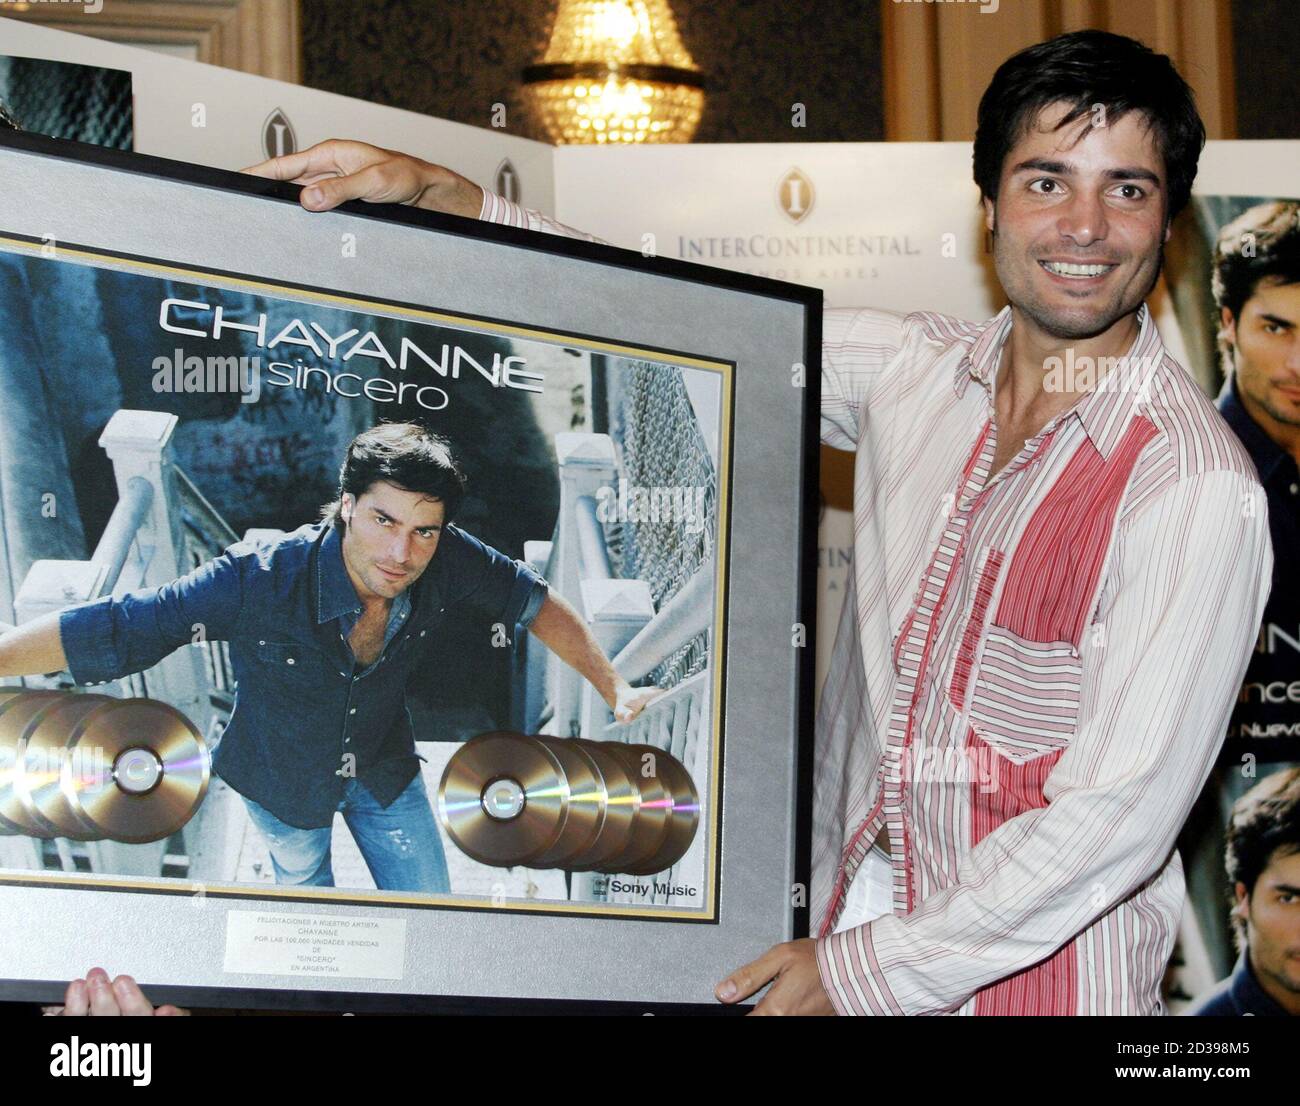 Puerto Rican singer and actor Chayanne, born Elmer Figueroa Arce, shows the cover of his latest album "Sincero" during a press conference in Buenos Aires, Argentina, March 8, 2004. Chayanne announced a North American tour that will take him across the United States through April, 2004. REUTERS/Enrique Marcarian  EM Stock Photo